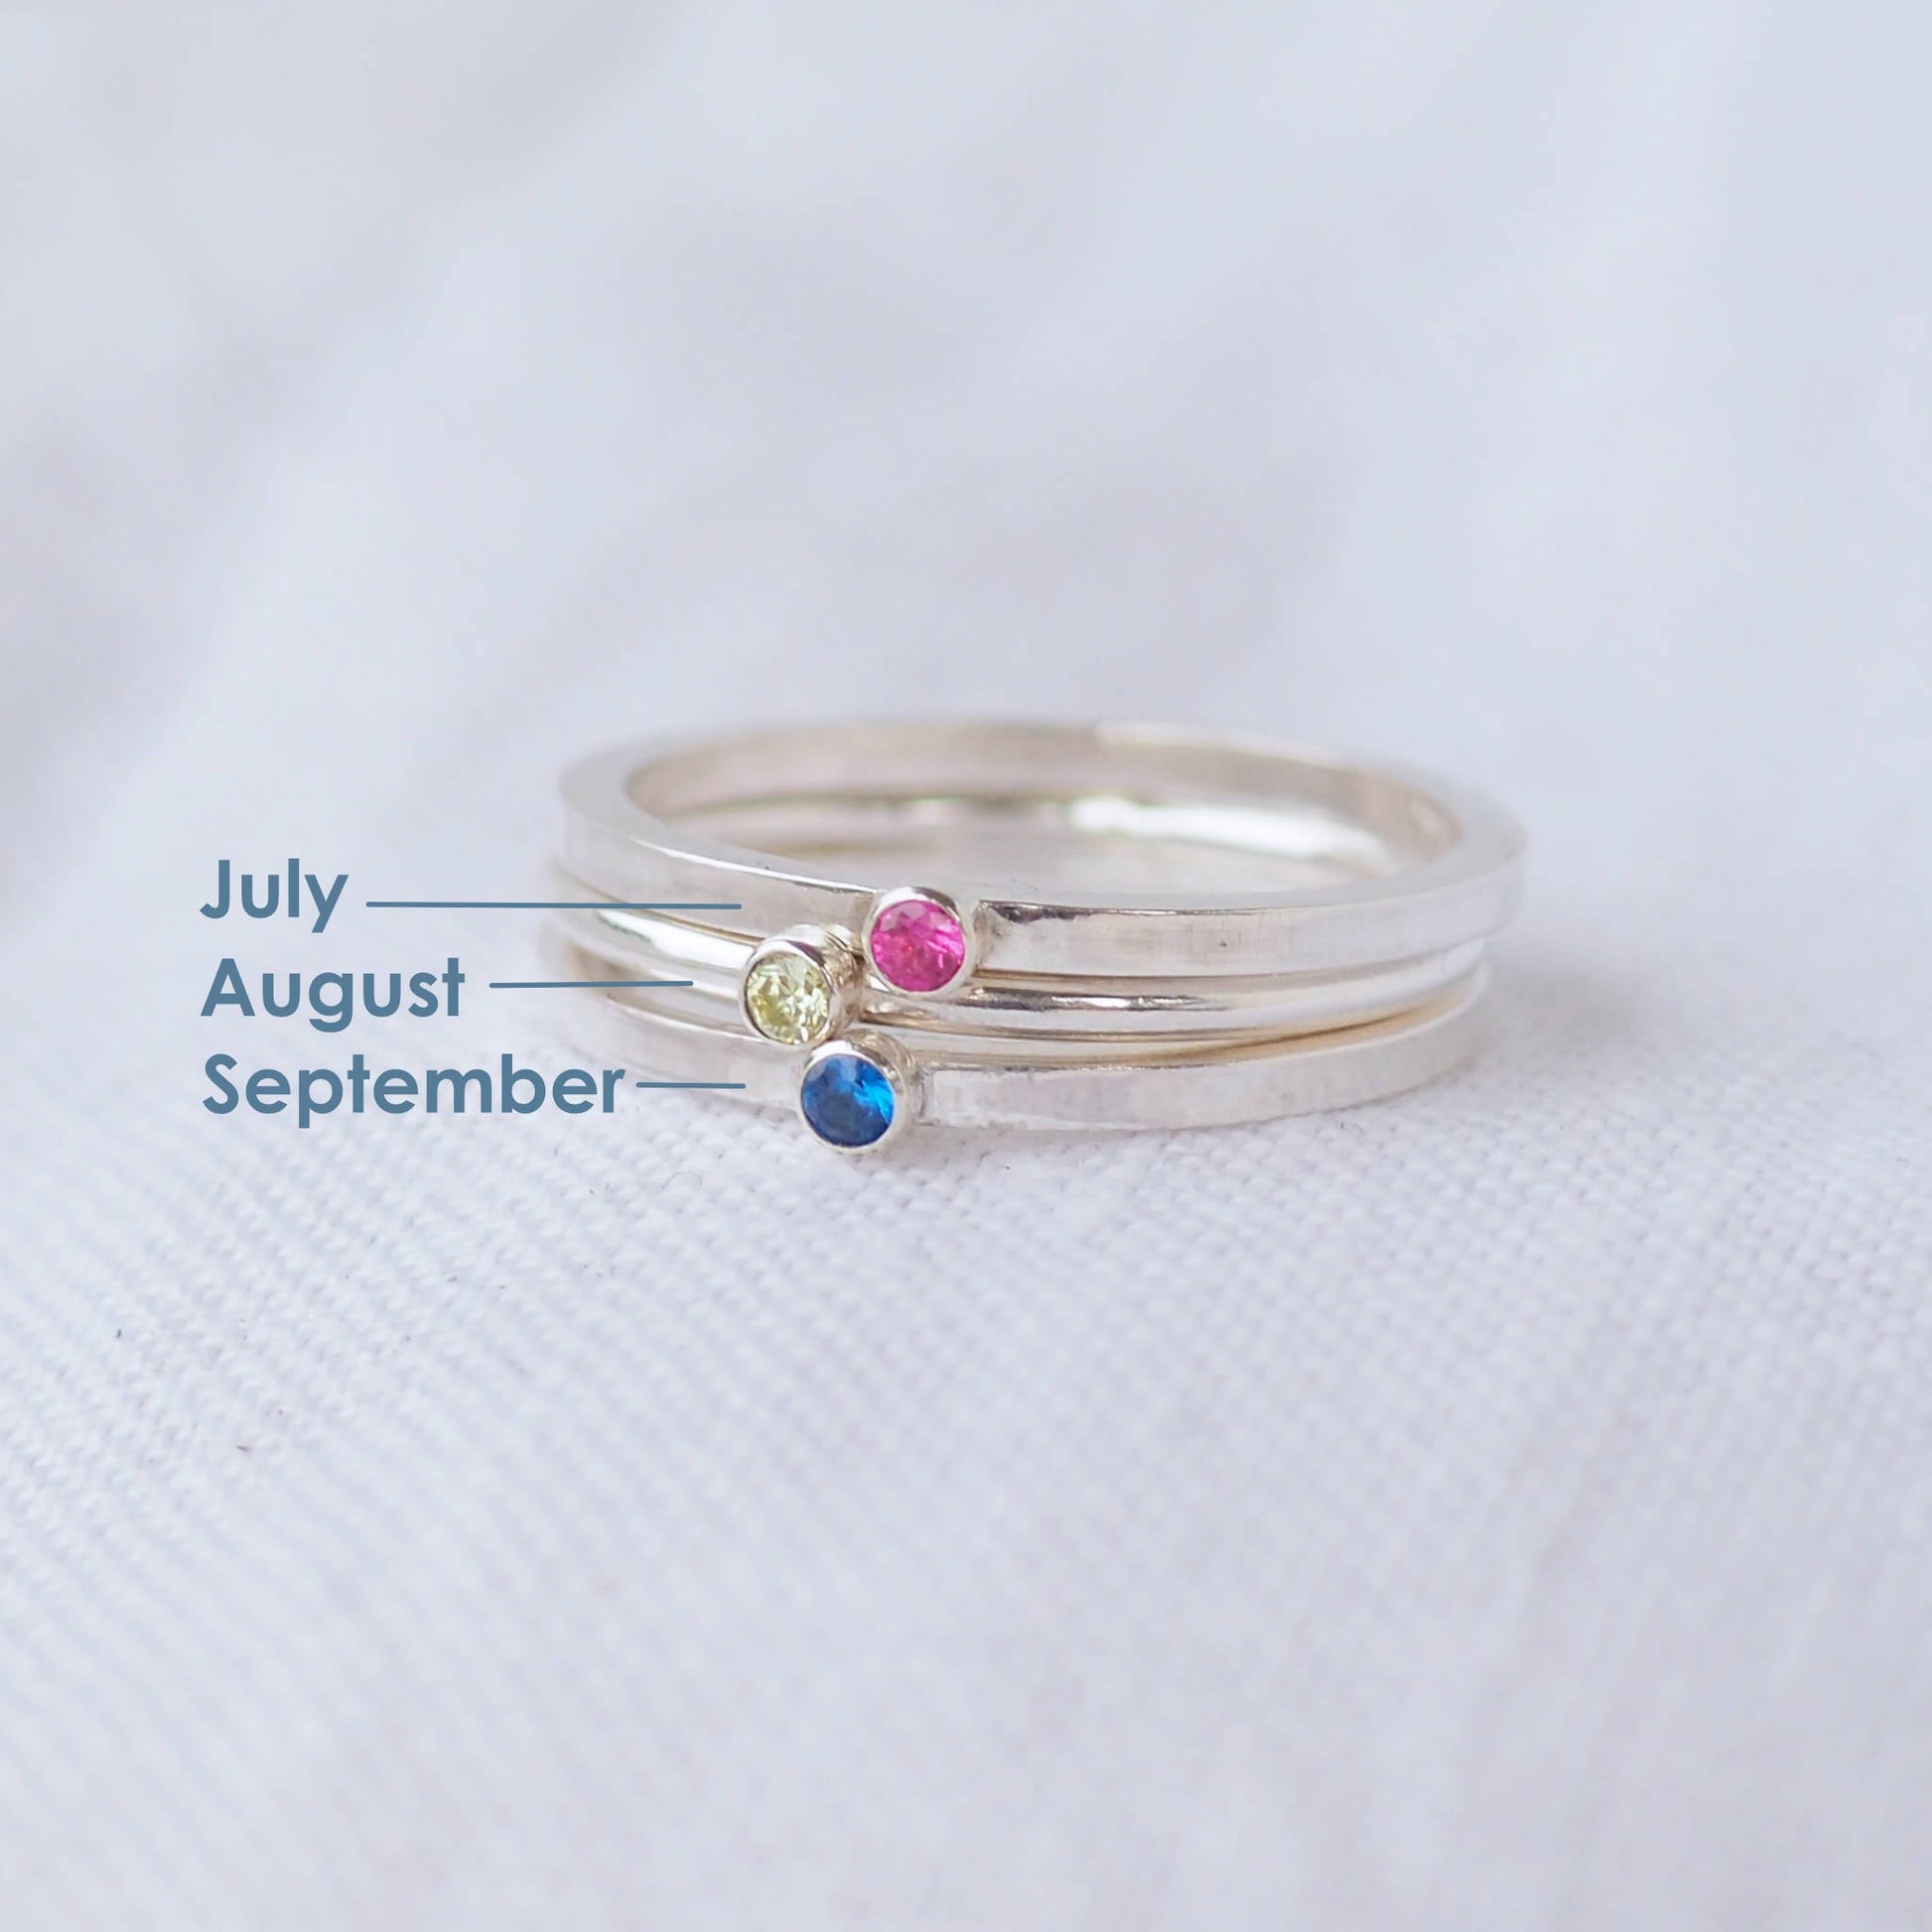 Three silver rings showing July,August and September  Birthstones. The rings are simple silver bands with a miniature birthstone on the band in pink,moss green and blue cubic zirconia. Handmade in Edinburgh by maram jewellery